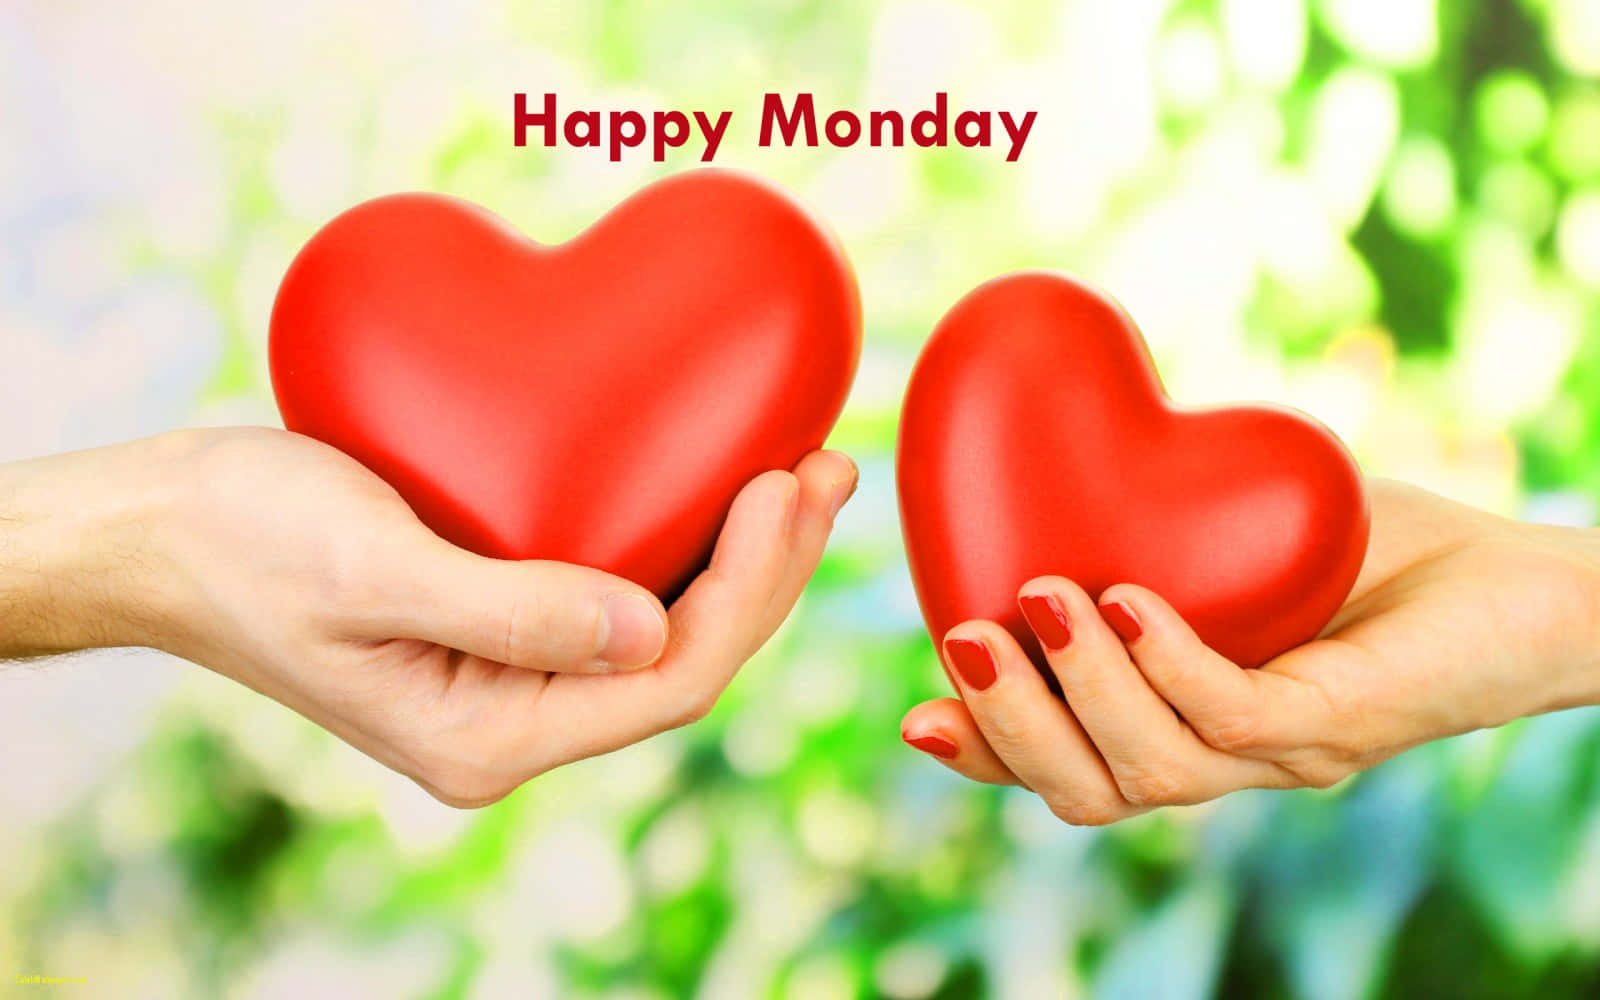 Happy Monday Hands Holding Red Hearts Picture